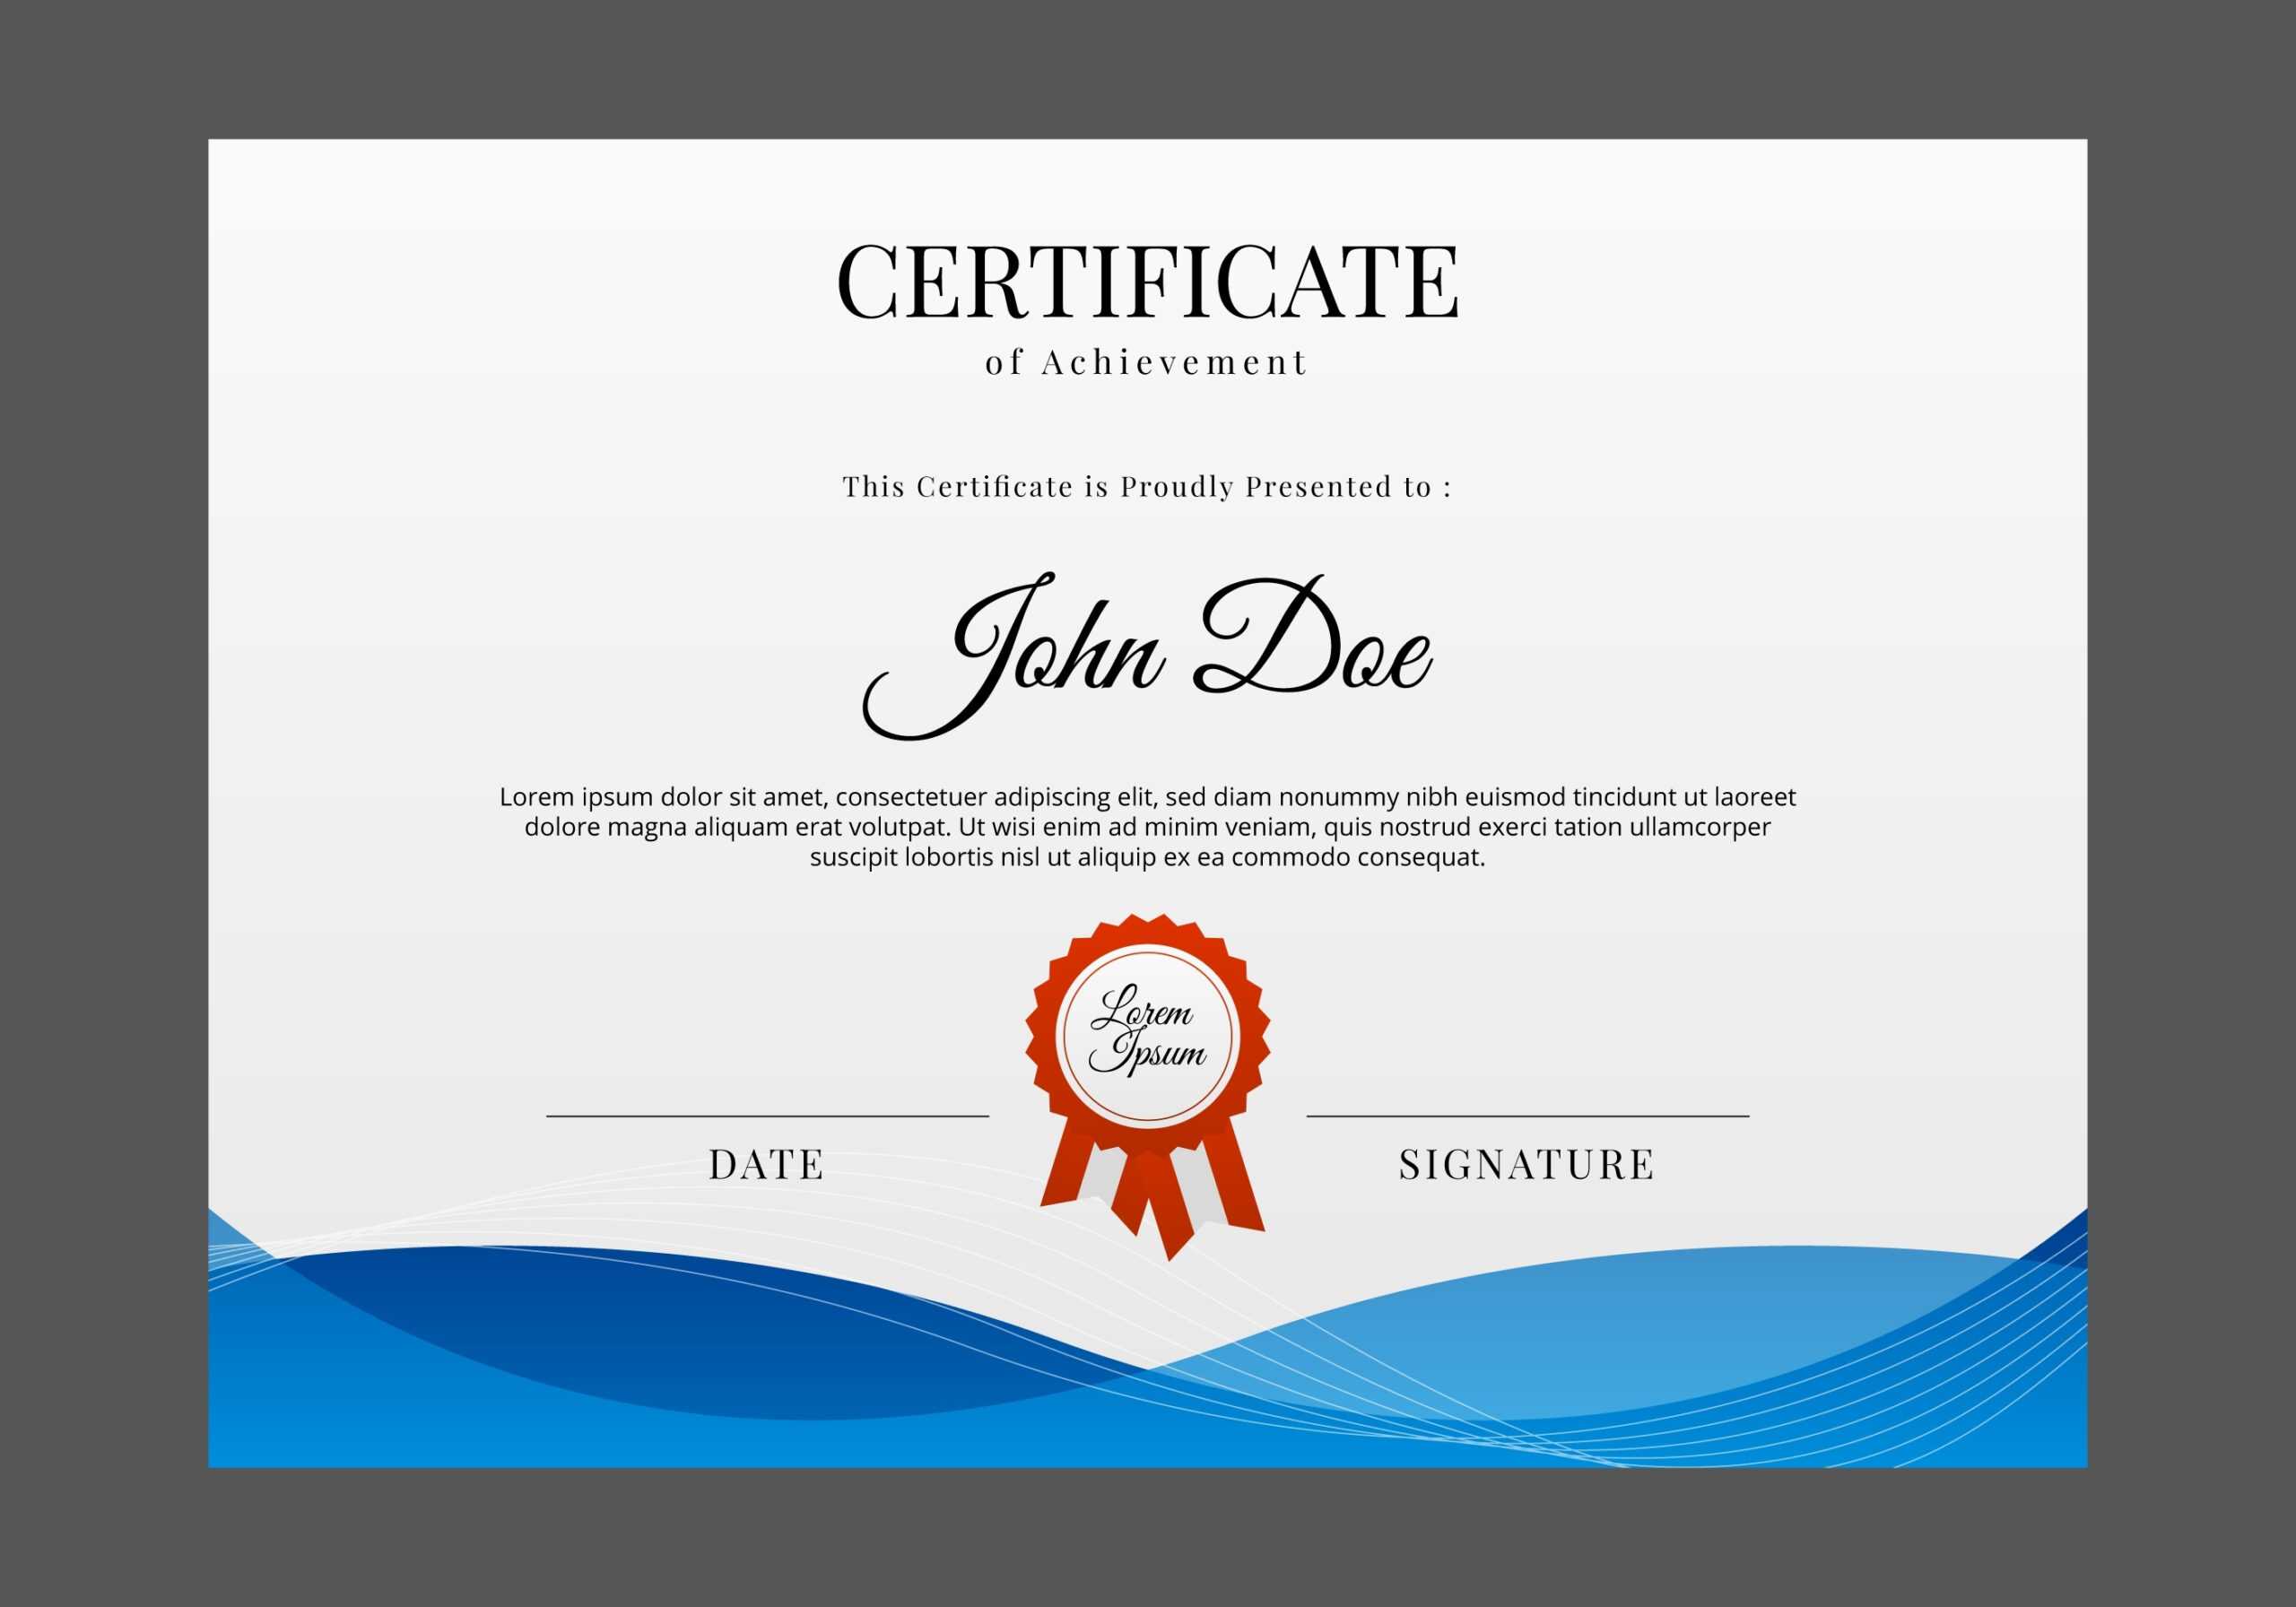 Certificate Design Free Vector Art – (10,170 Free Downloads Intended For Free Art Certificate Templates